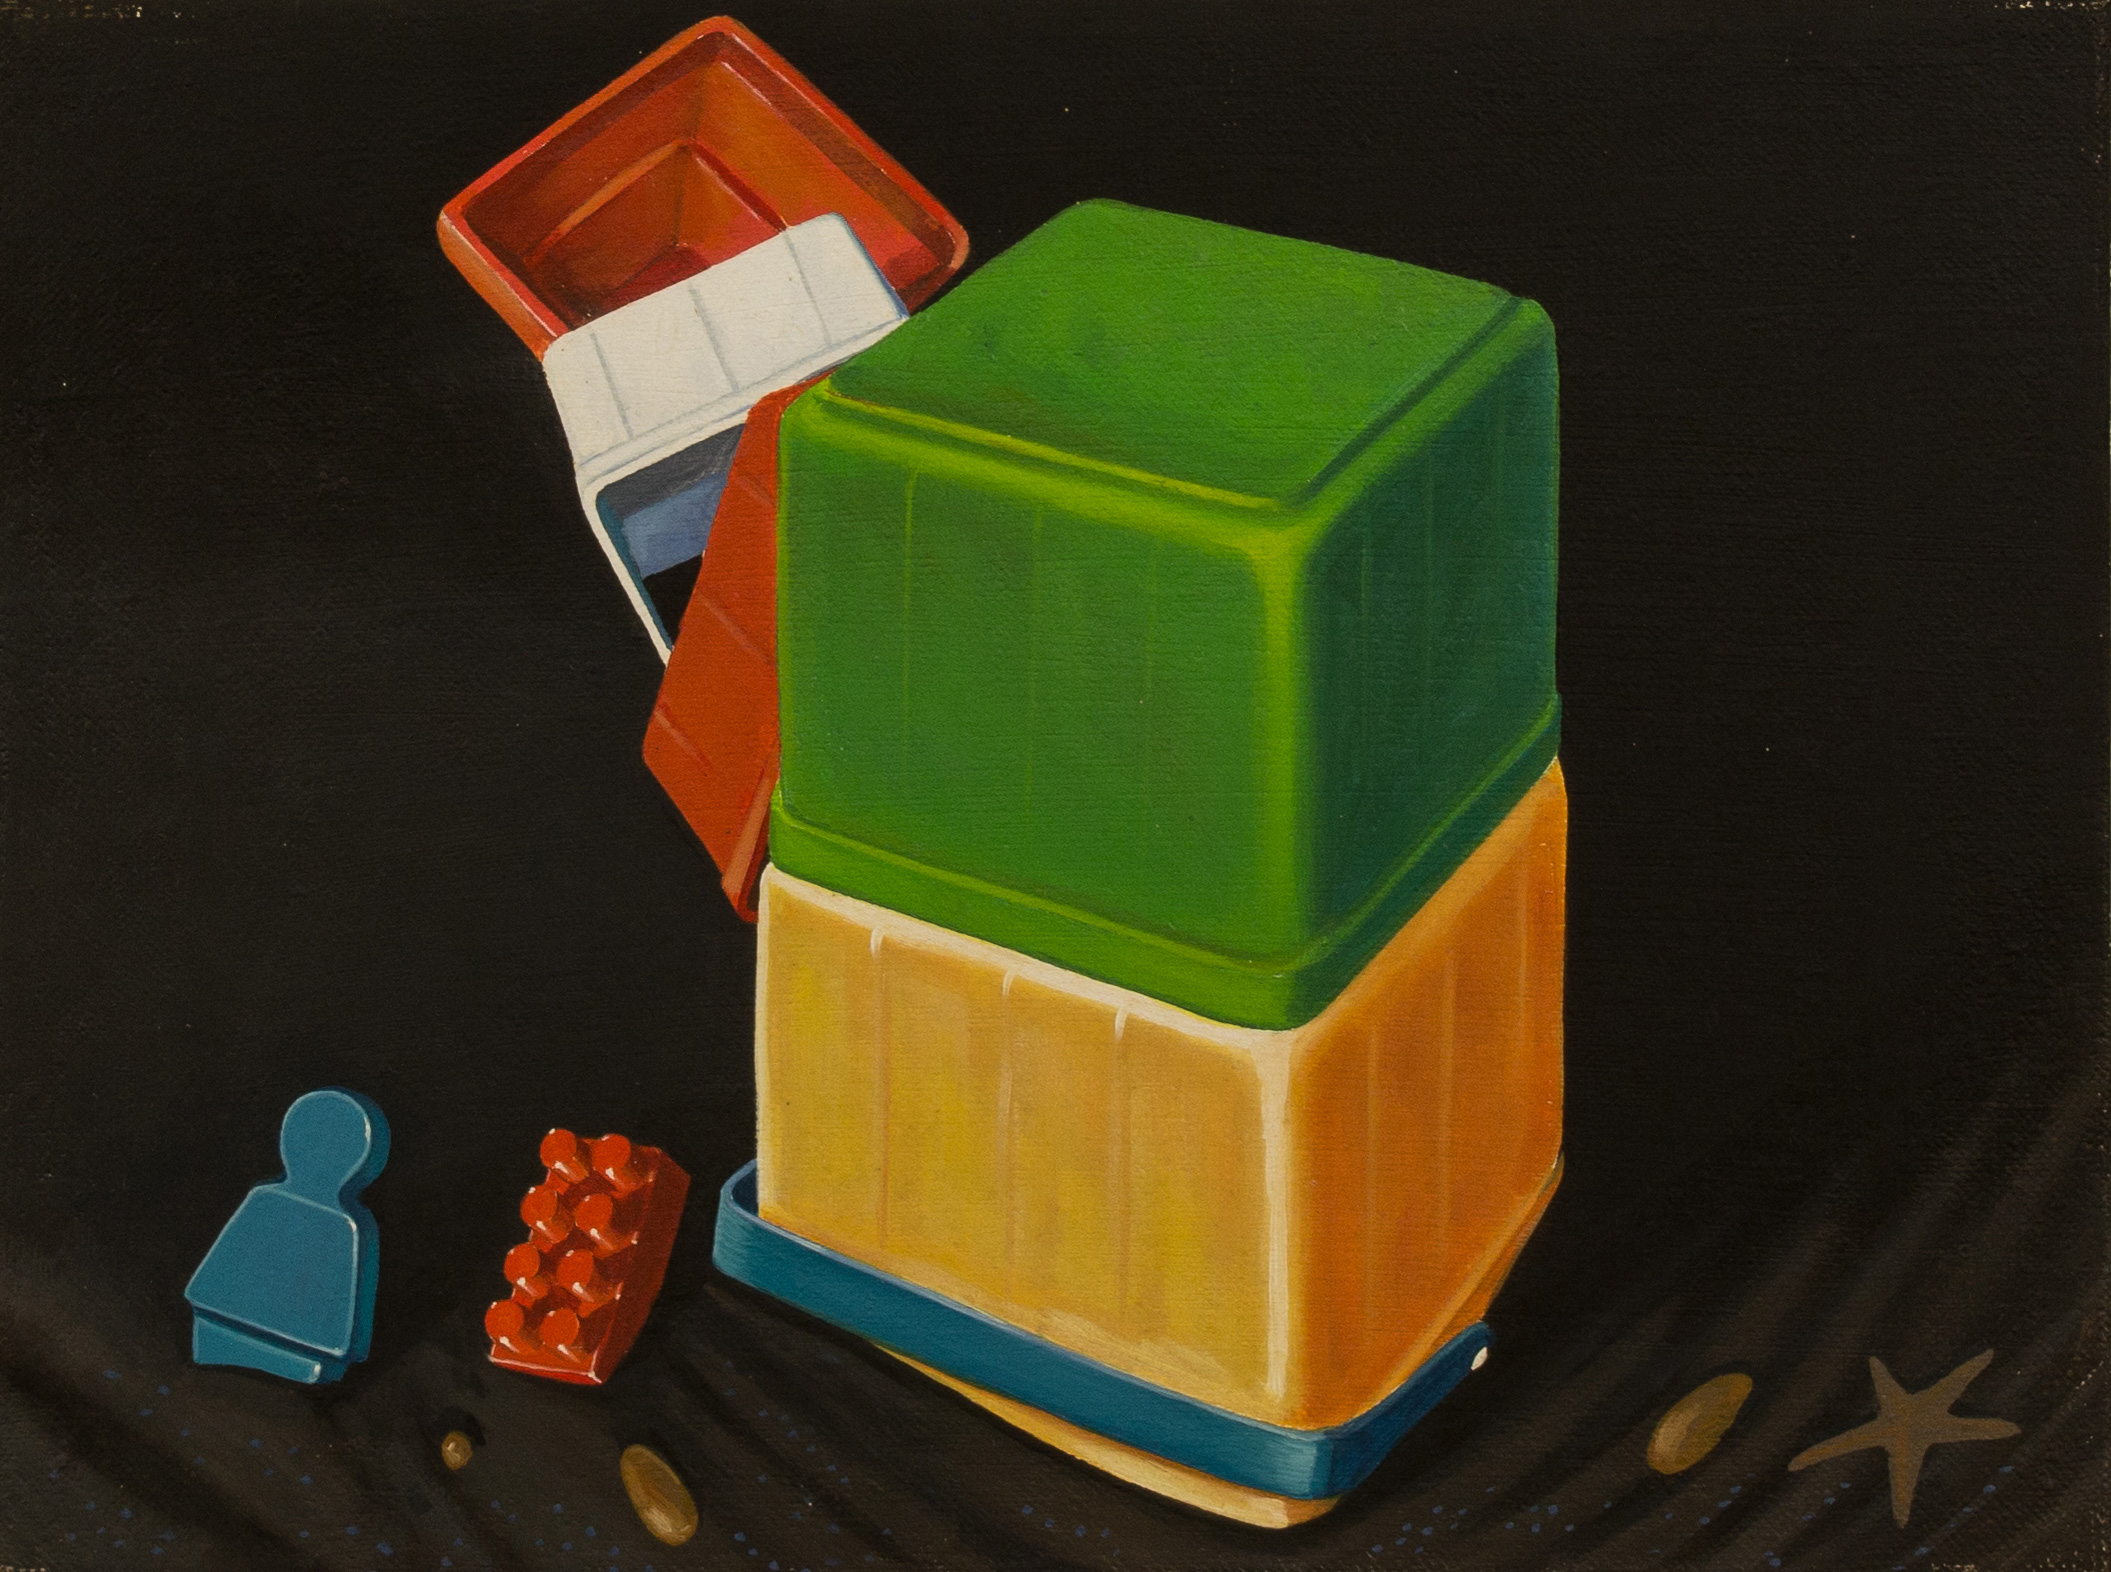   Tower Games ,  oil on canvas, cm 30x40, 1996  